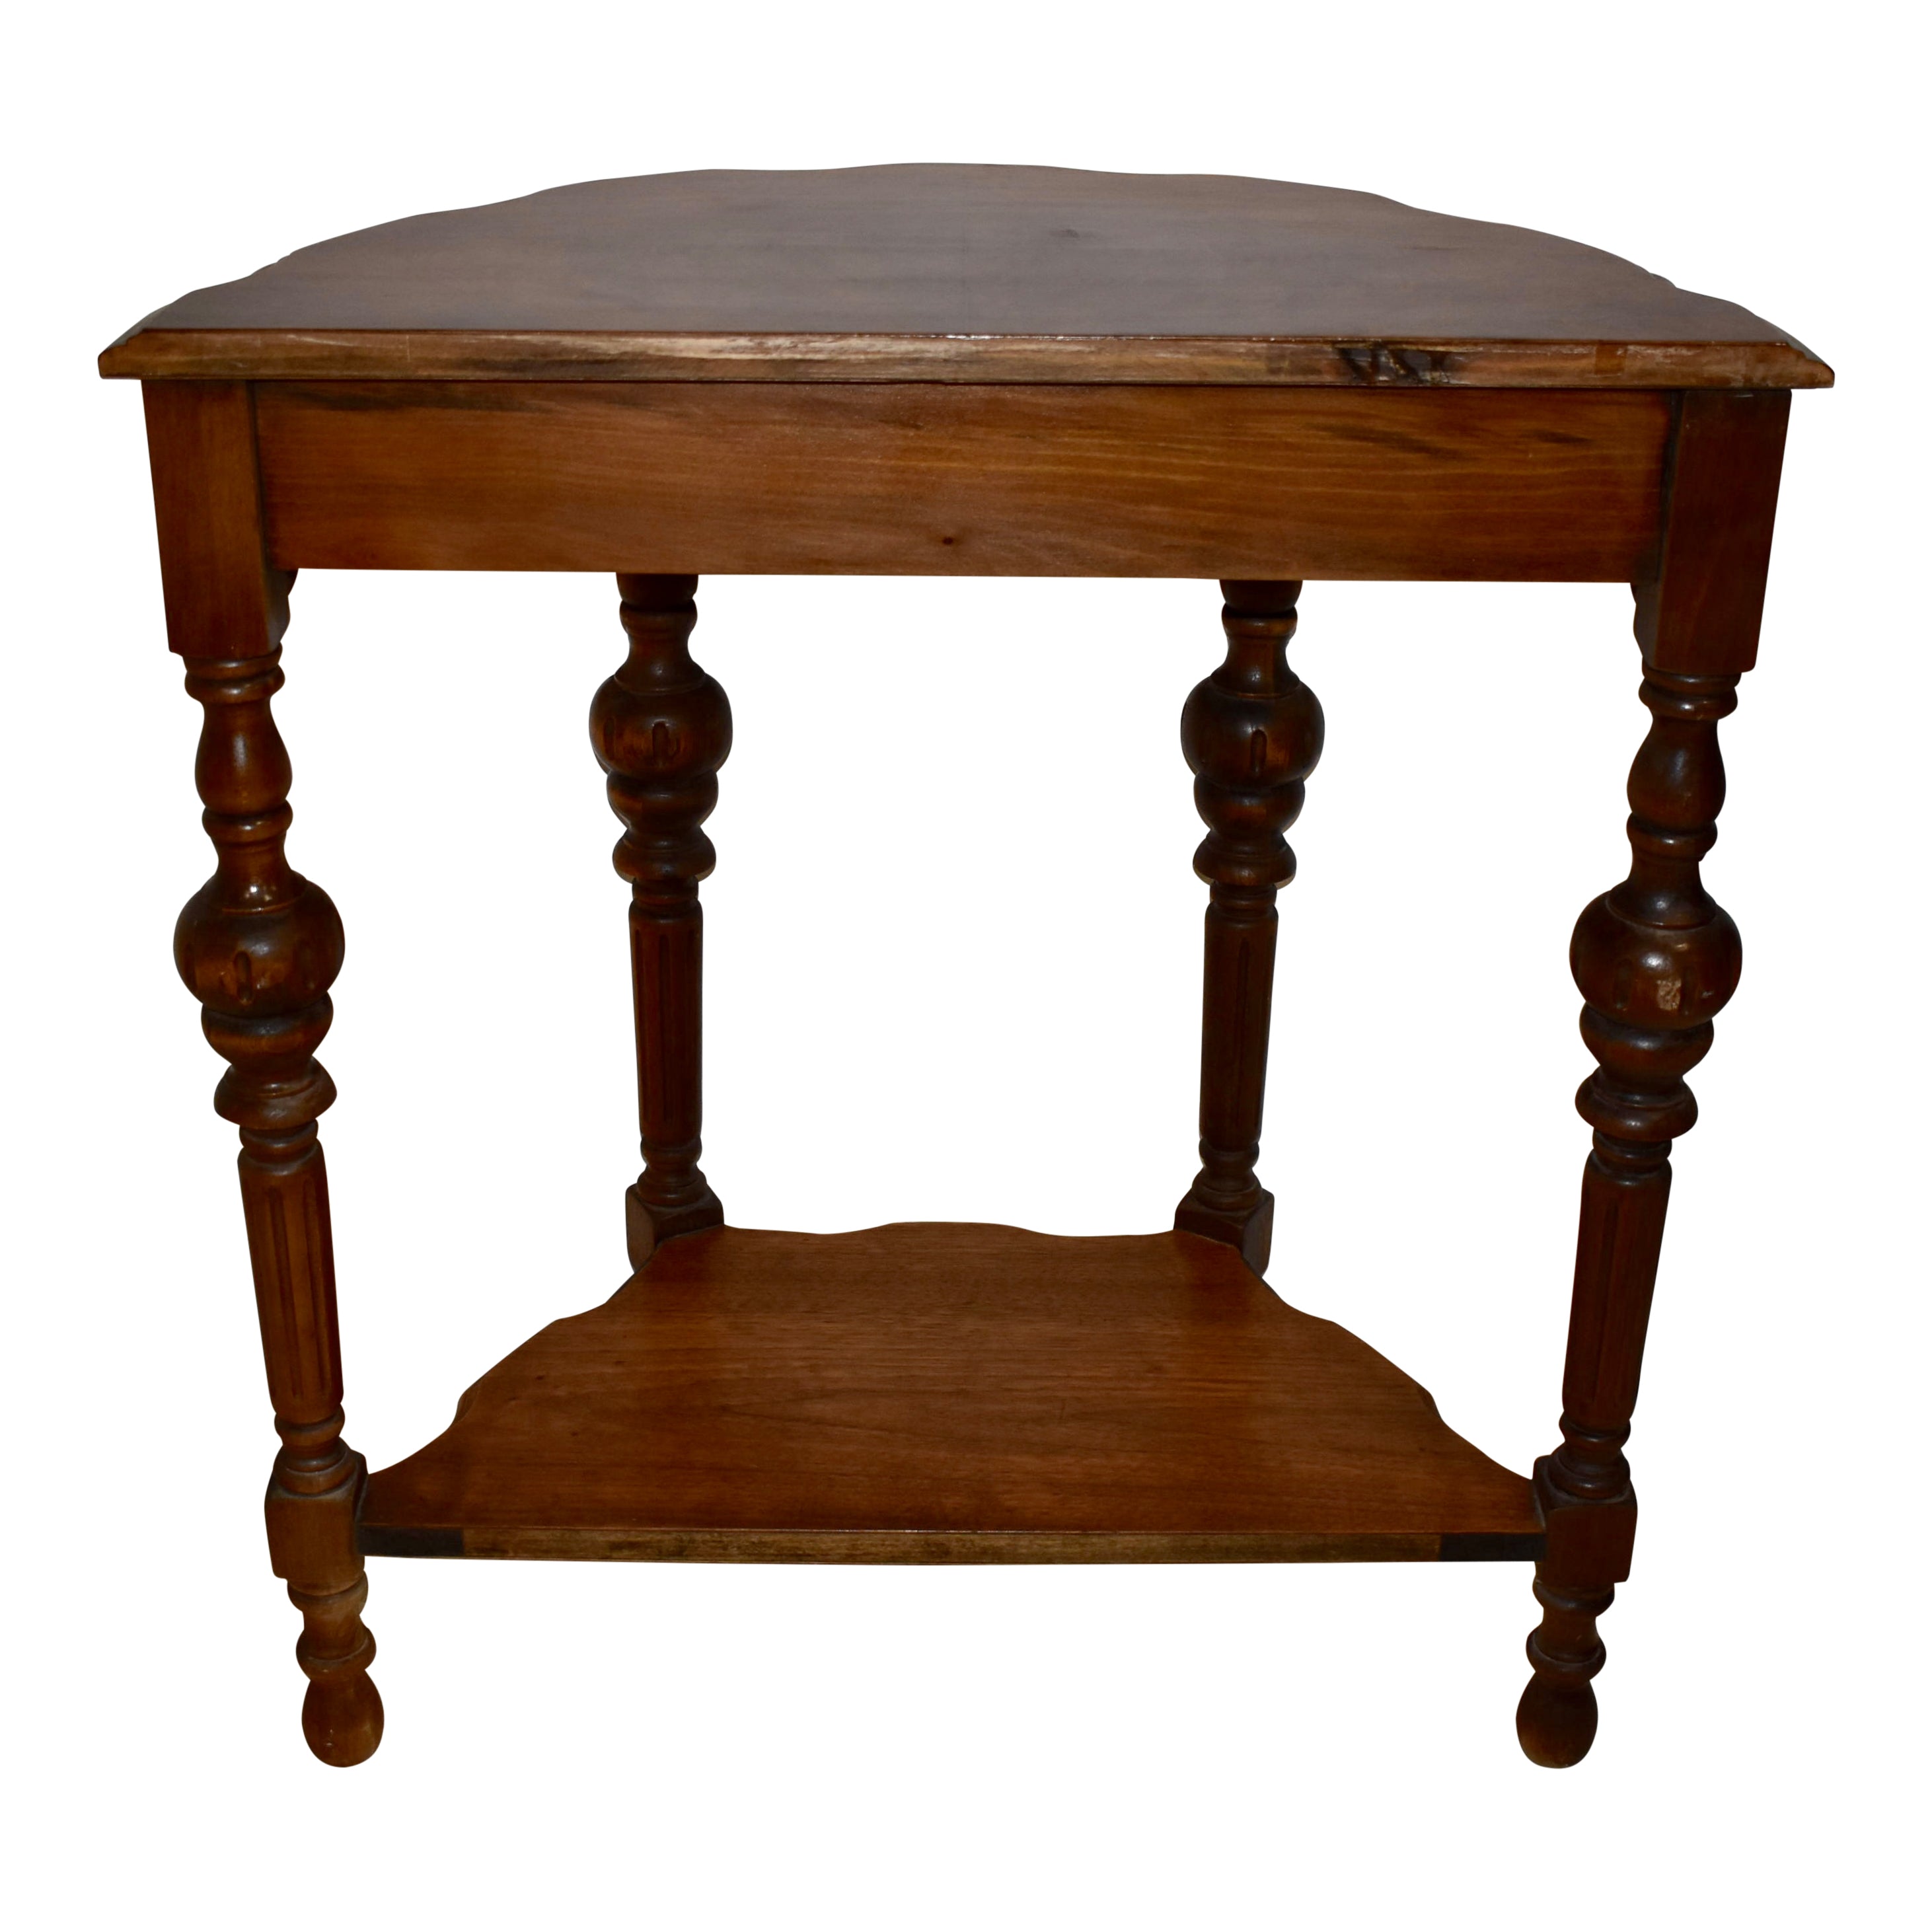 Carved Walnut Crescent Demilune Table